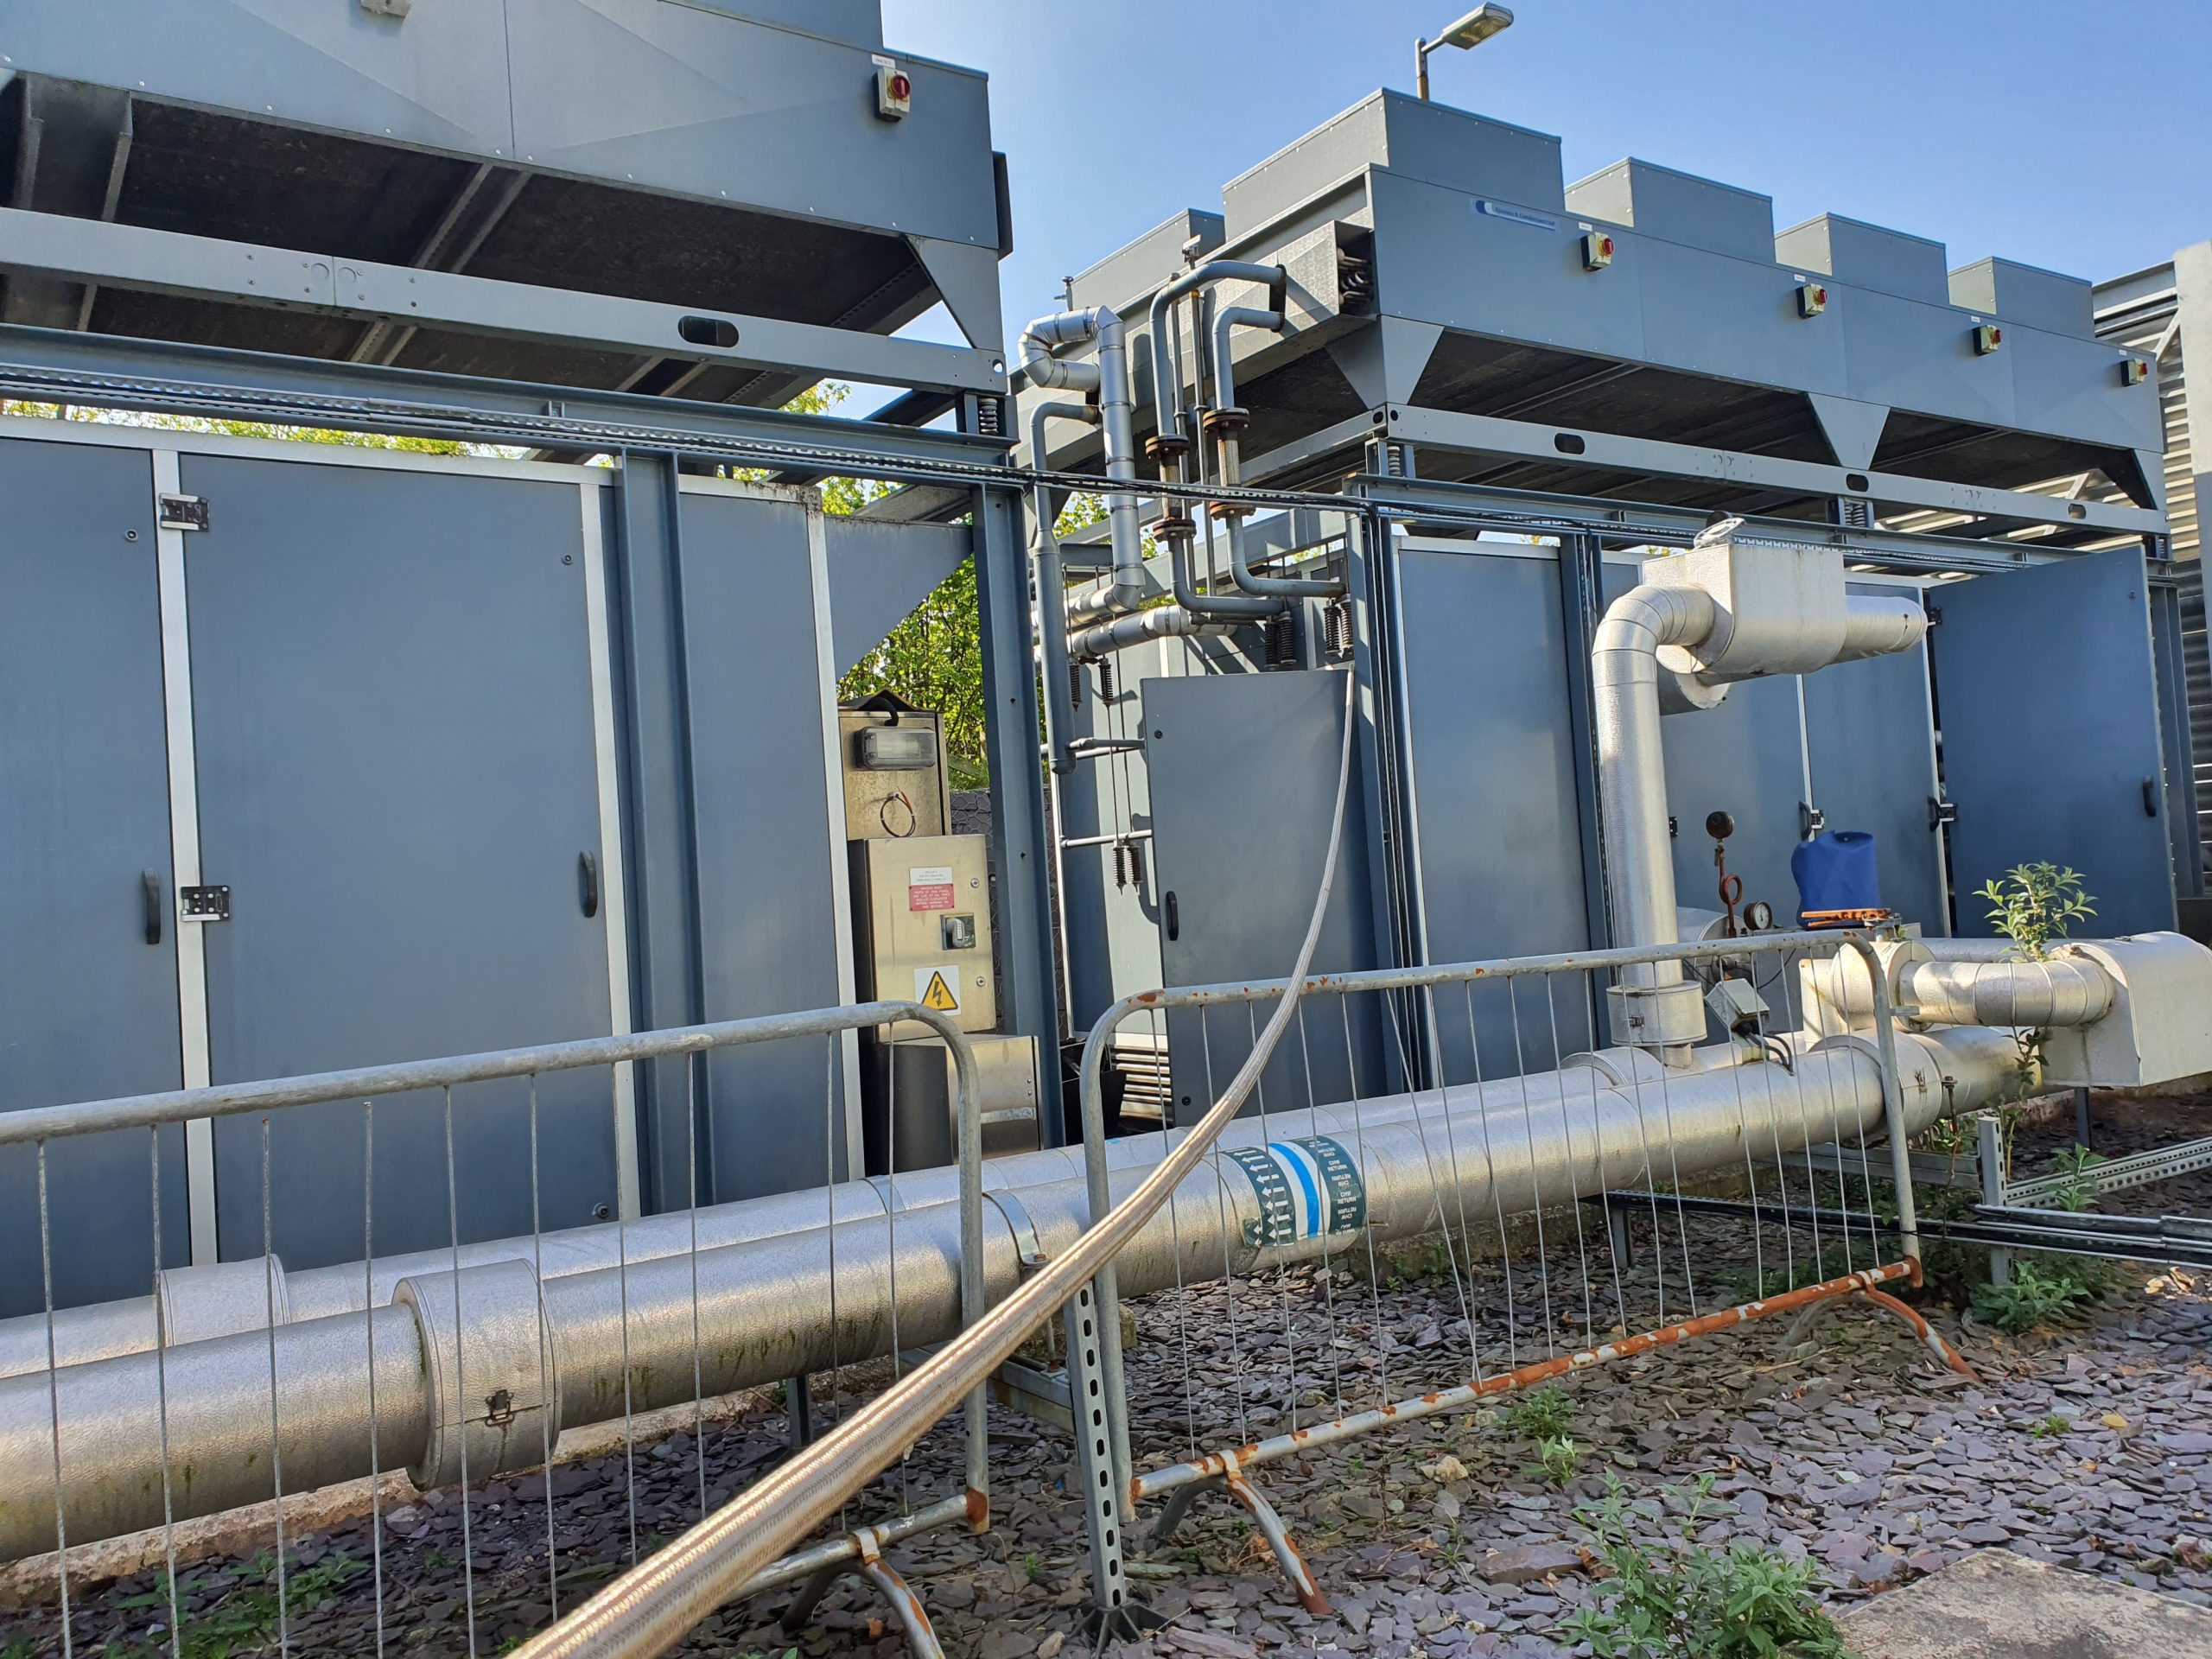 Example of chiller types: 2 grey containerised ammonia chillers with air cooled condensers on top